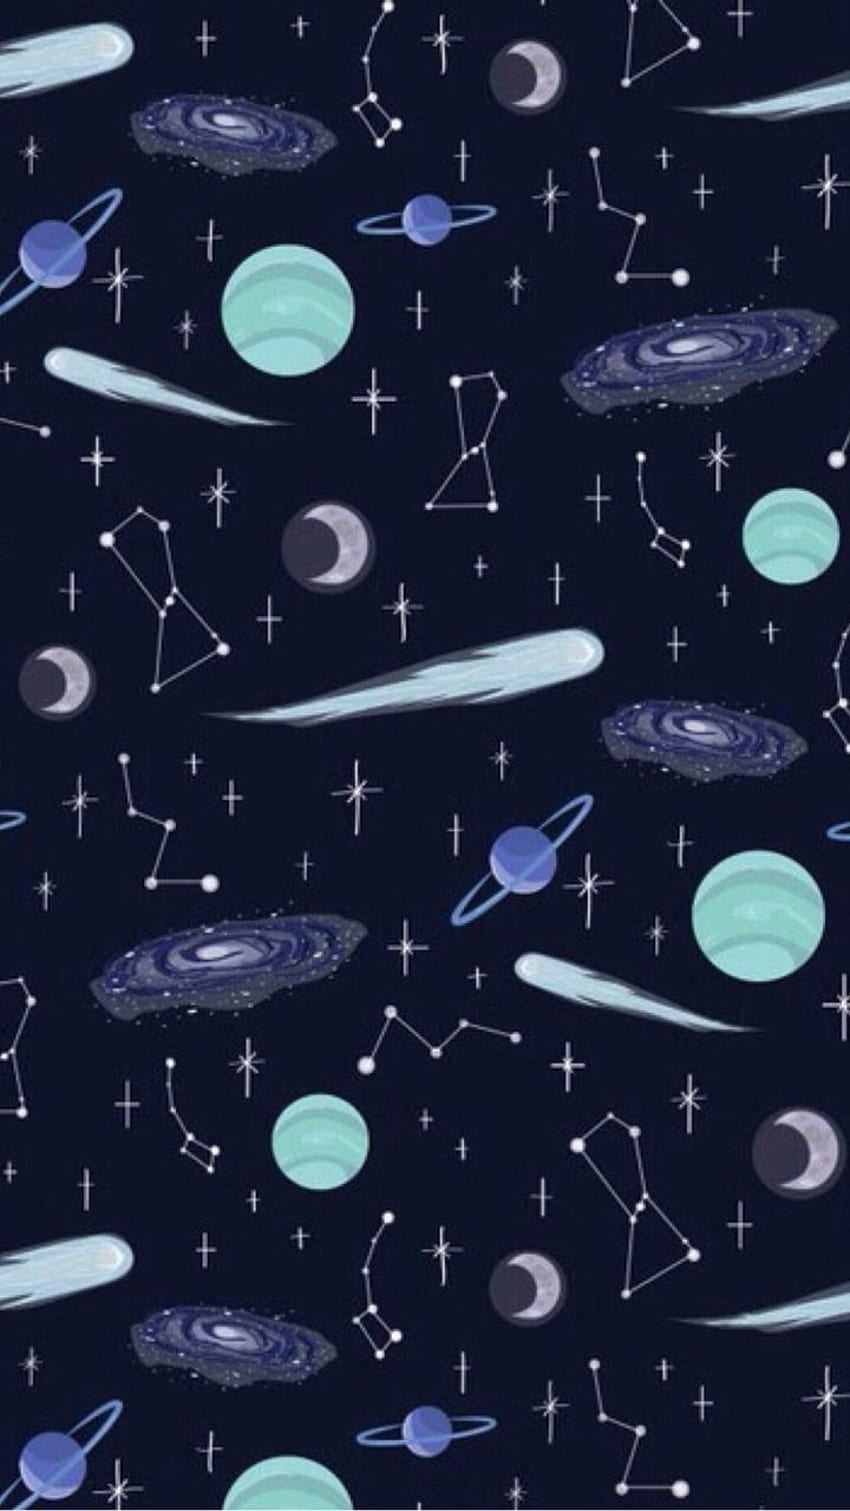 A seamless pattern of celestial objects - Constellation